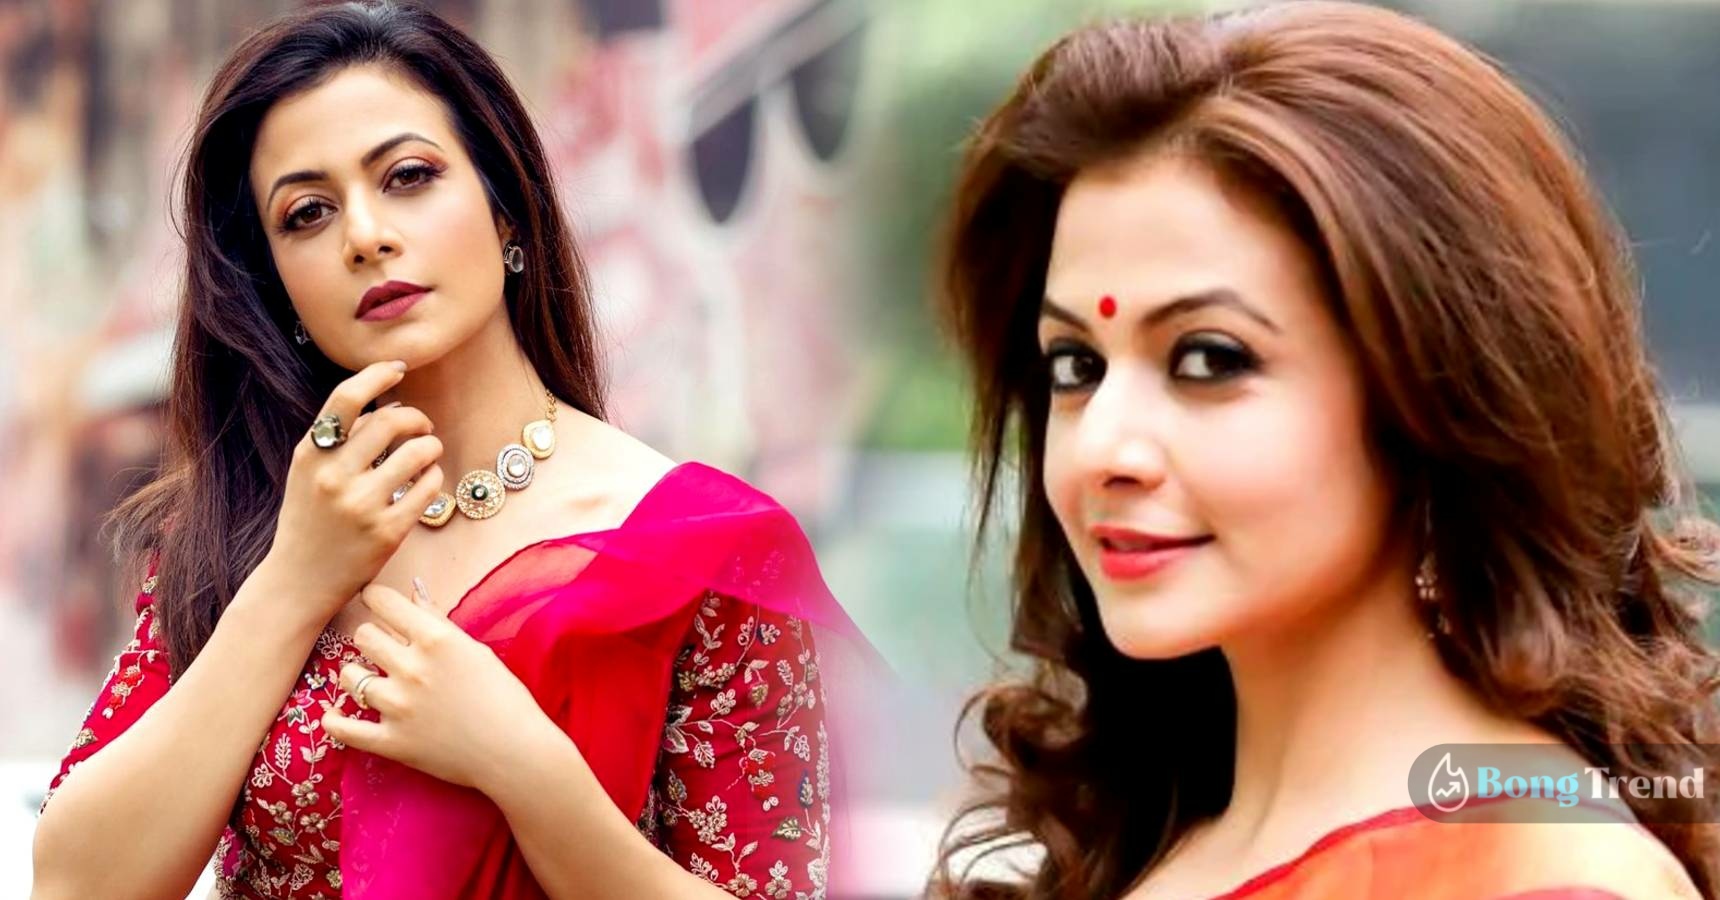 Do you know Koel Mallick rejected the offer of this Bollywood movie because of kissing scene